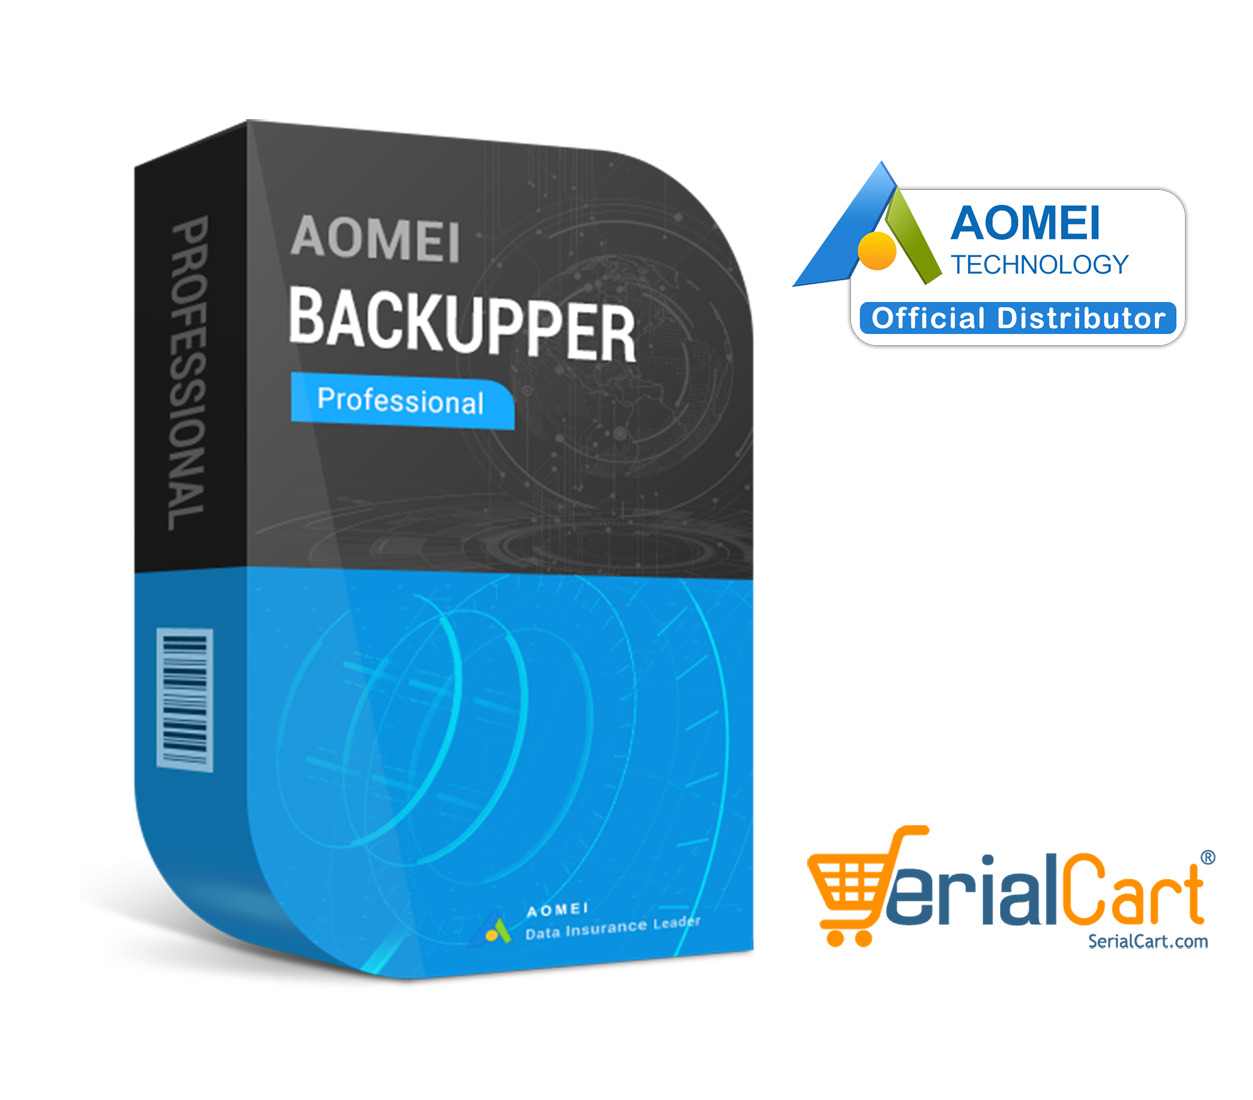 AOMEI Backupper Professional for 1 PC - 1 Year